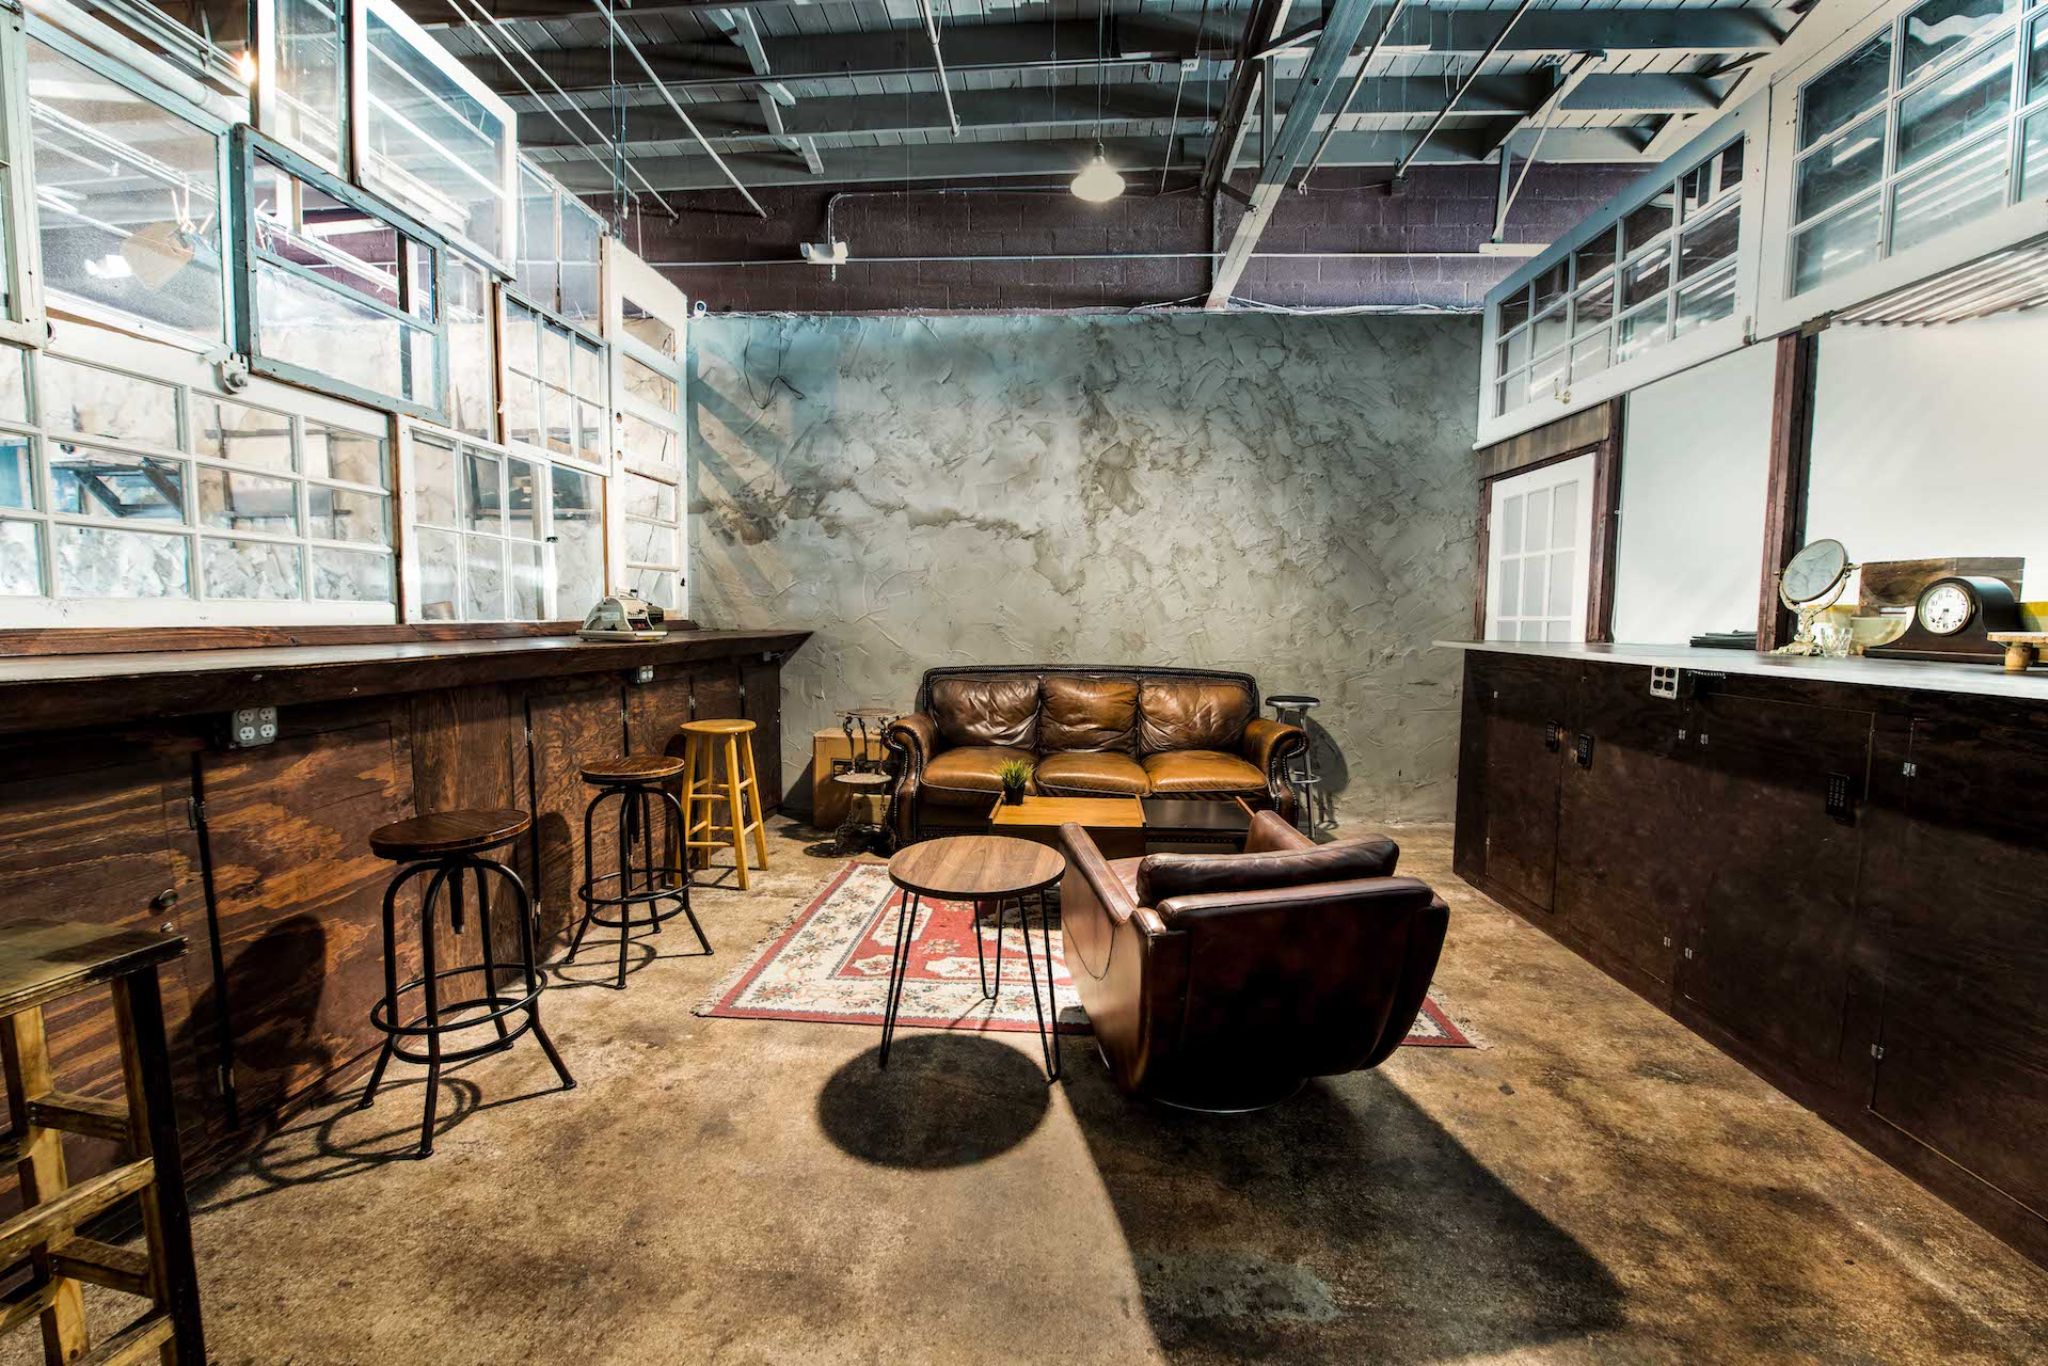 C&I Studios Room With A Leather Couch, Chair And Barstools At A Nextdoor Florida Bar Rental Place.